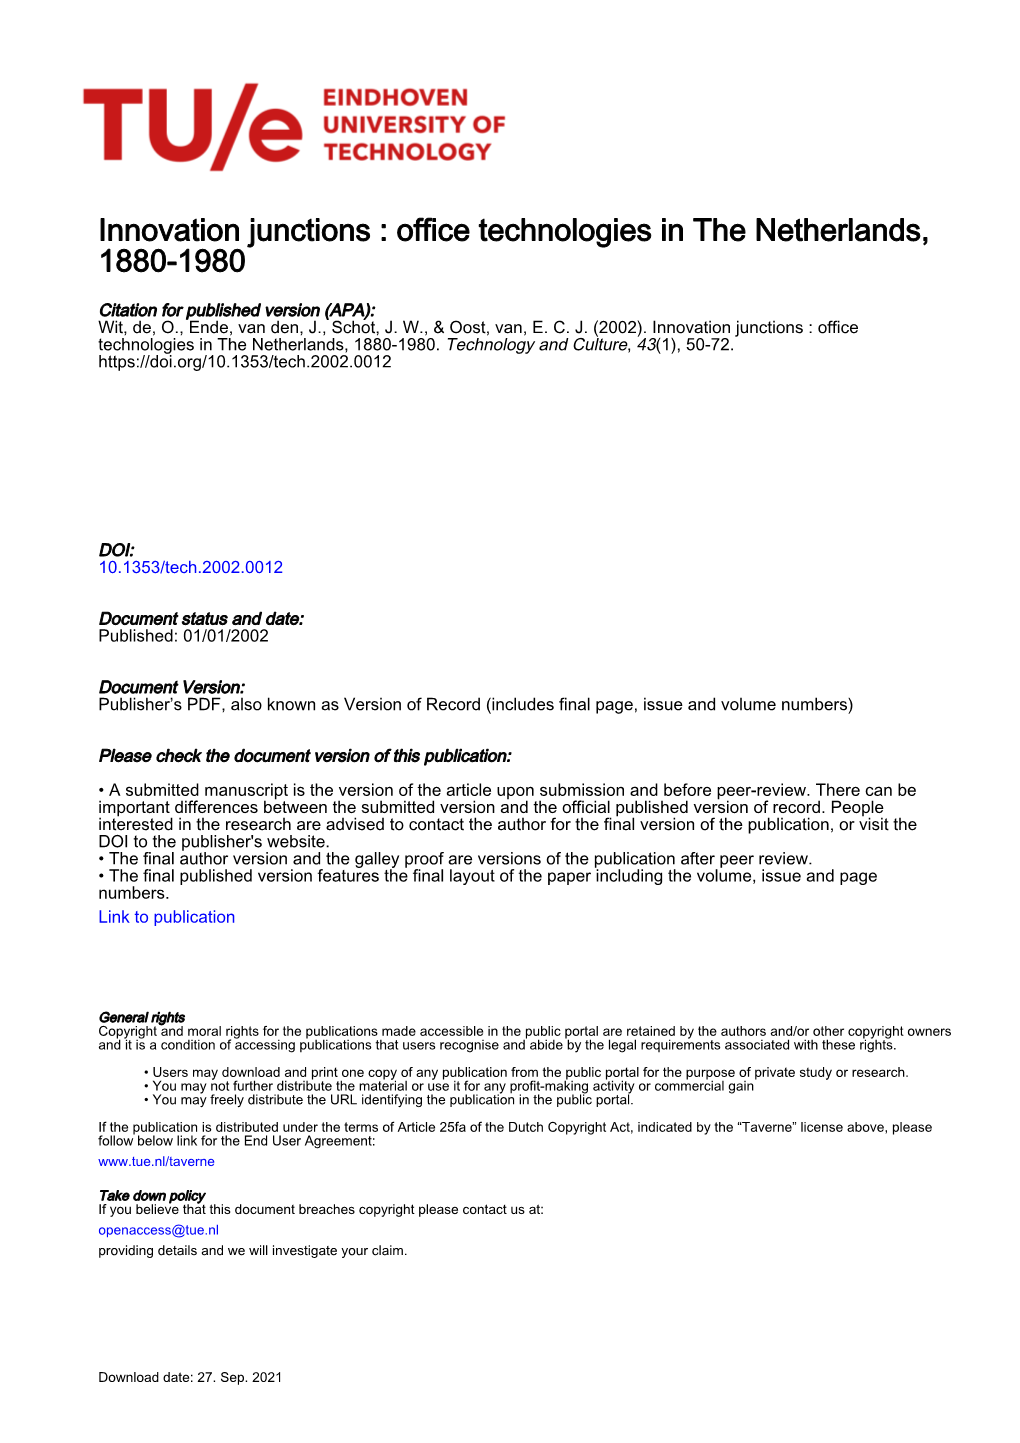 Innovation Junctions : Office Technologies in the Netherlands, 1880-1980